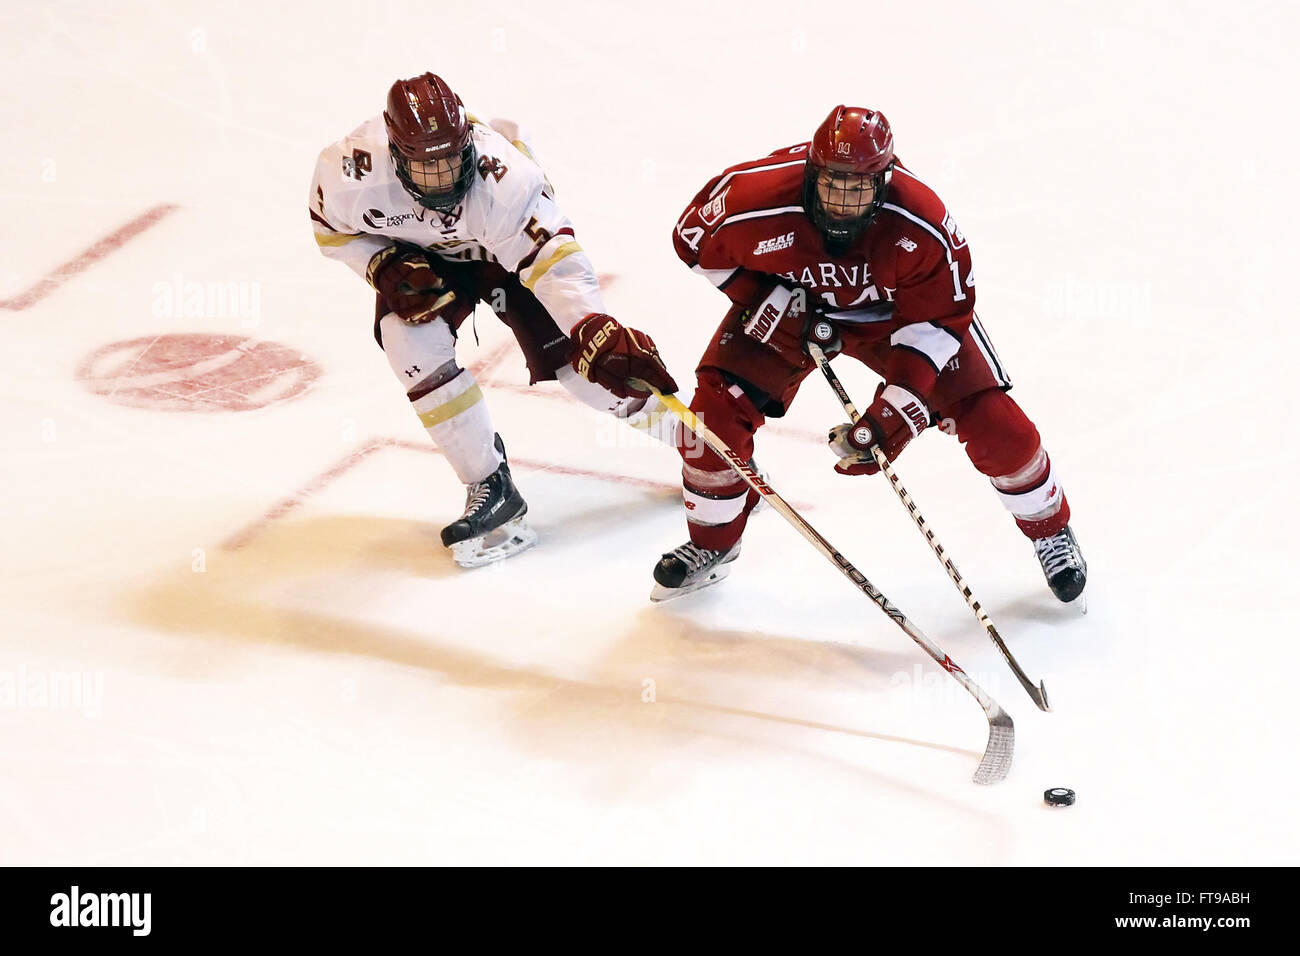 March 25, 2016; Worcester, MA, USA; Harvard Crimson forward Alexander Kerfoot (14) and Boston College Eagles defenseman Casey Fitzgerald (5) in action during the first round of the Northeast Regional NCAA hockey game between Harvard Crimson and Boston College Eagles at the DCU Center. Boston College defeated Harvard 4-1. Anthony Nesmith/Cal Sport Media Stock Photo